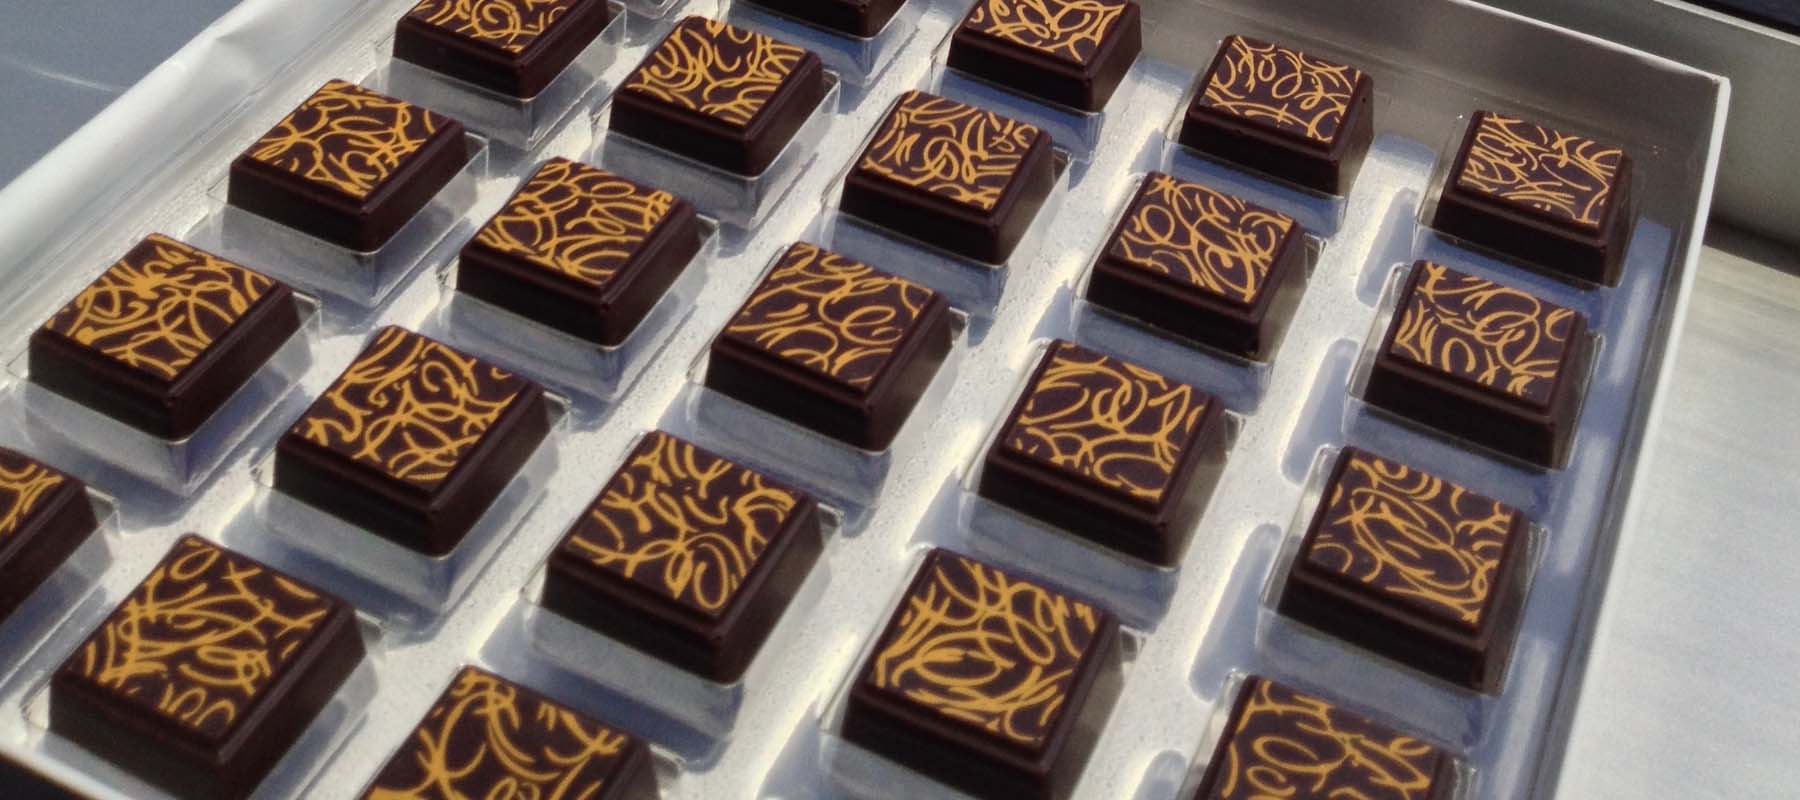 Chocolate delicacies lay on a tray ready to be served at the Chocolate International Salon